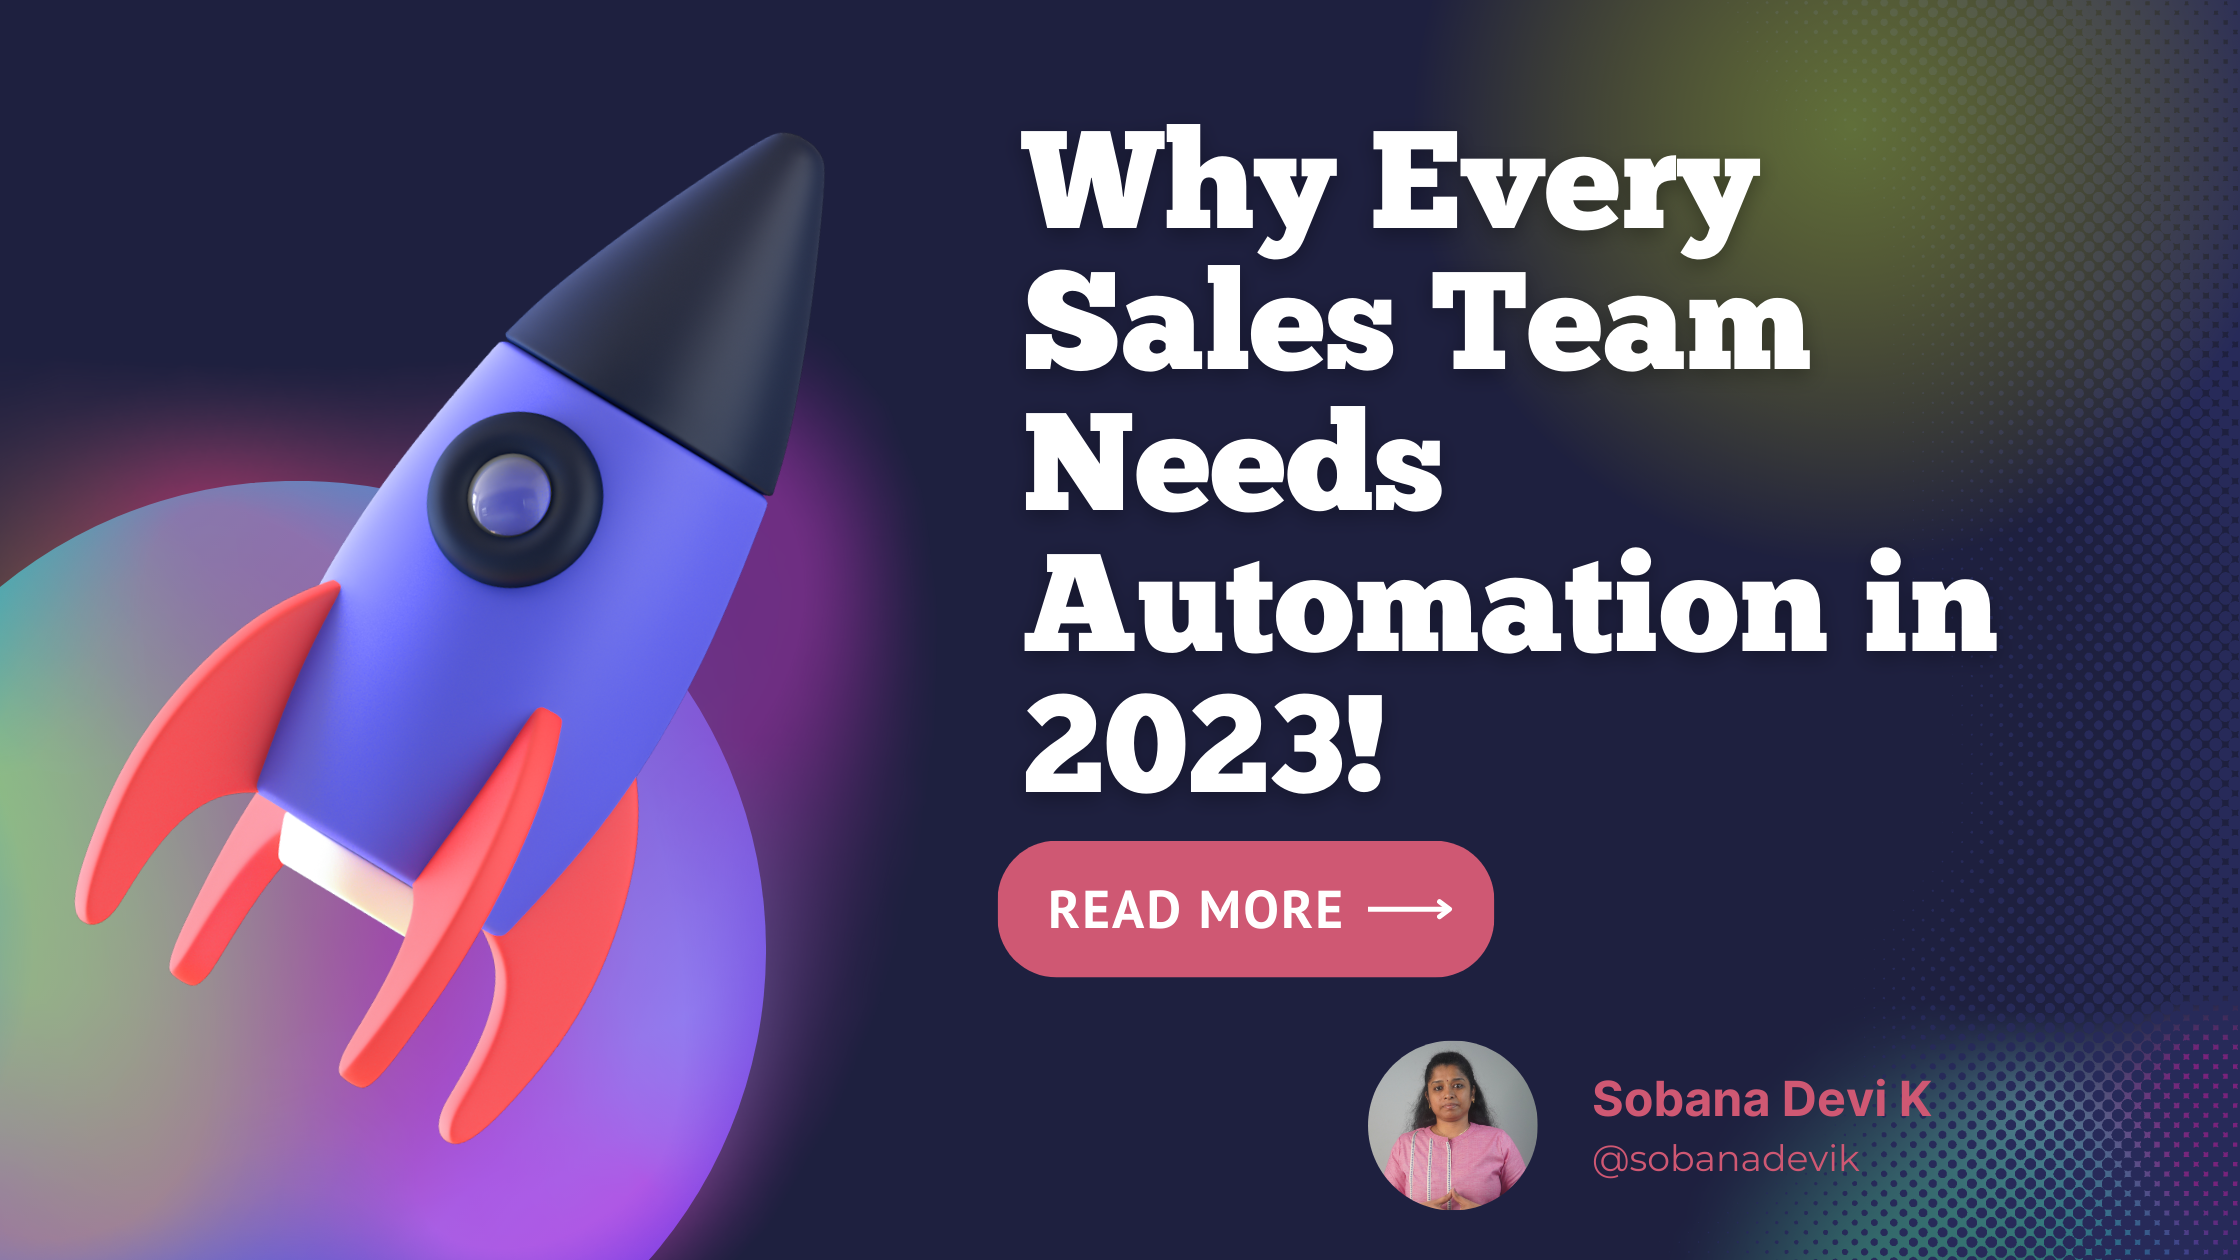 You are currently viewing Why Every Sales Team Needs Automation in 2023!